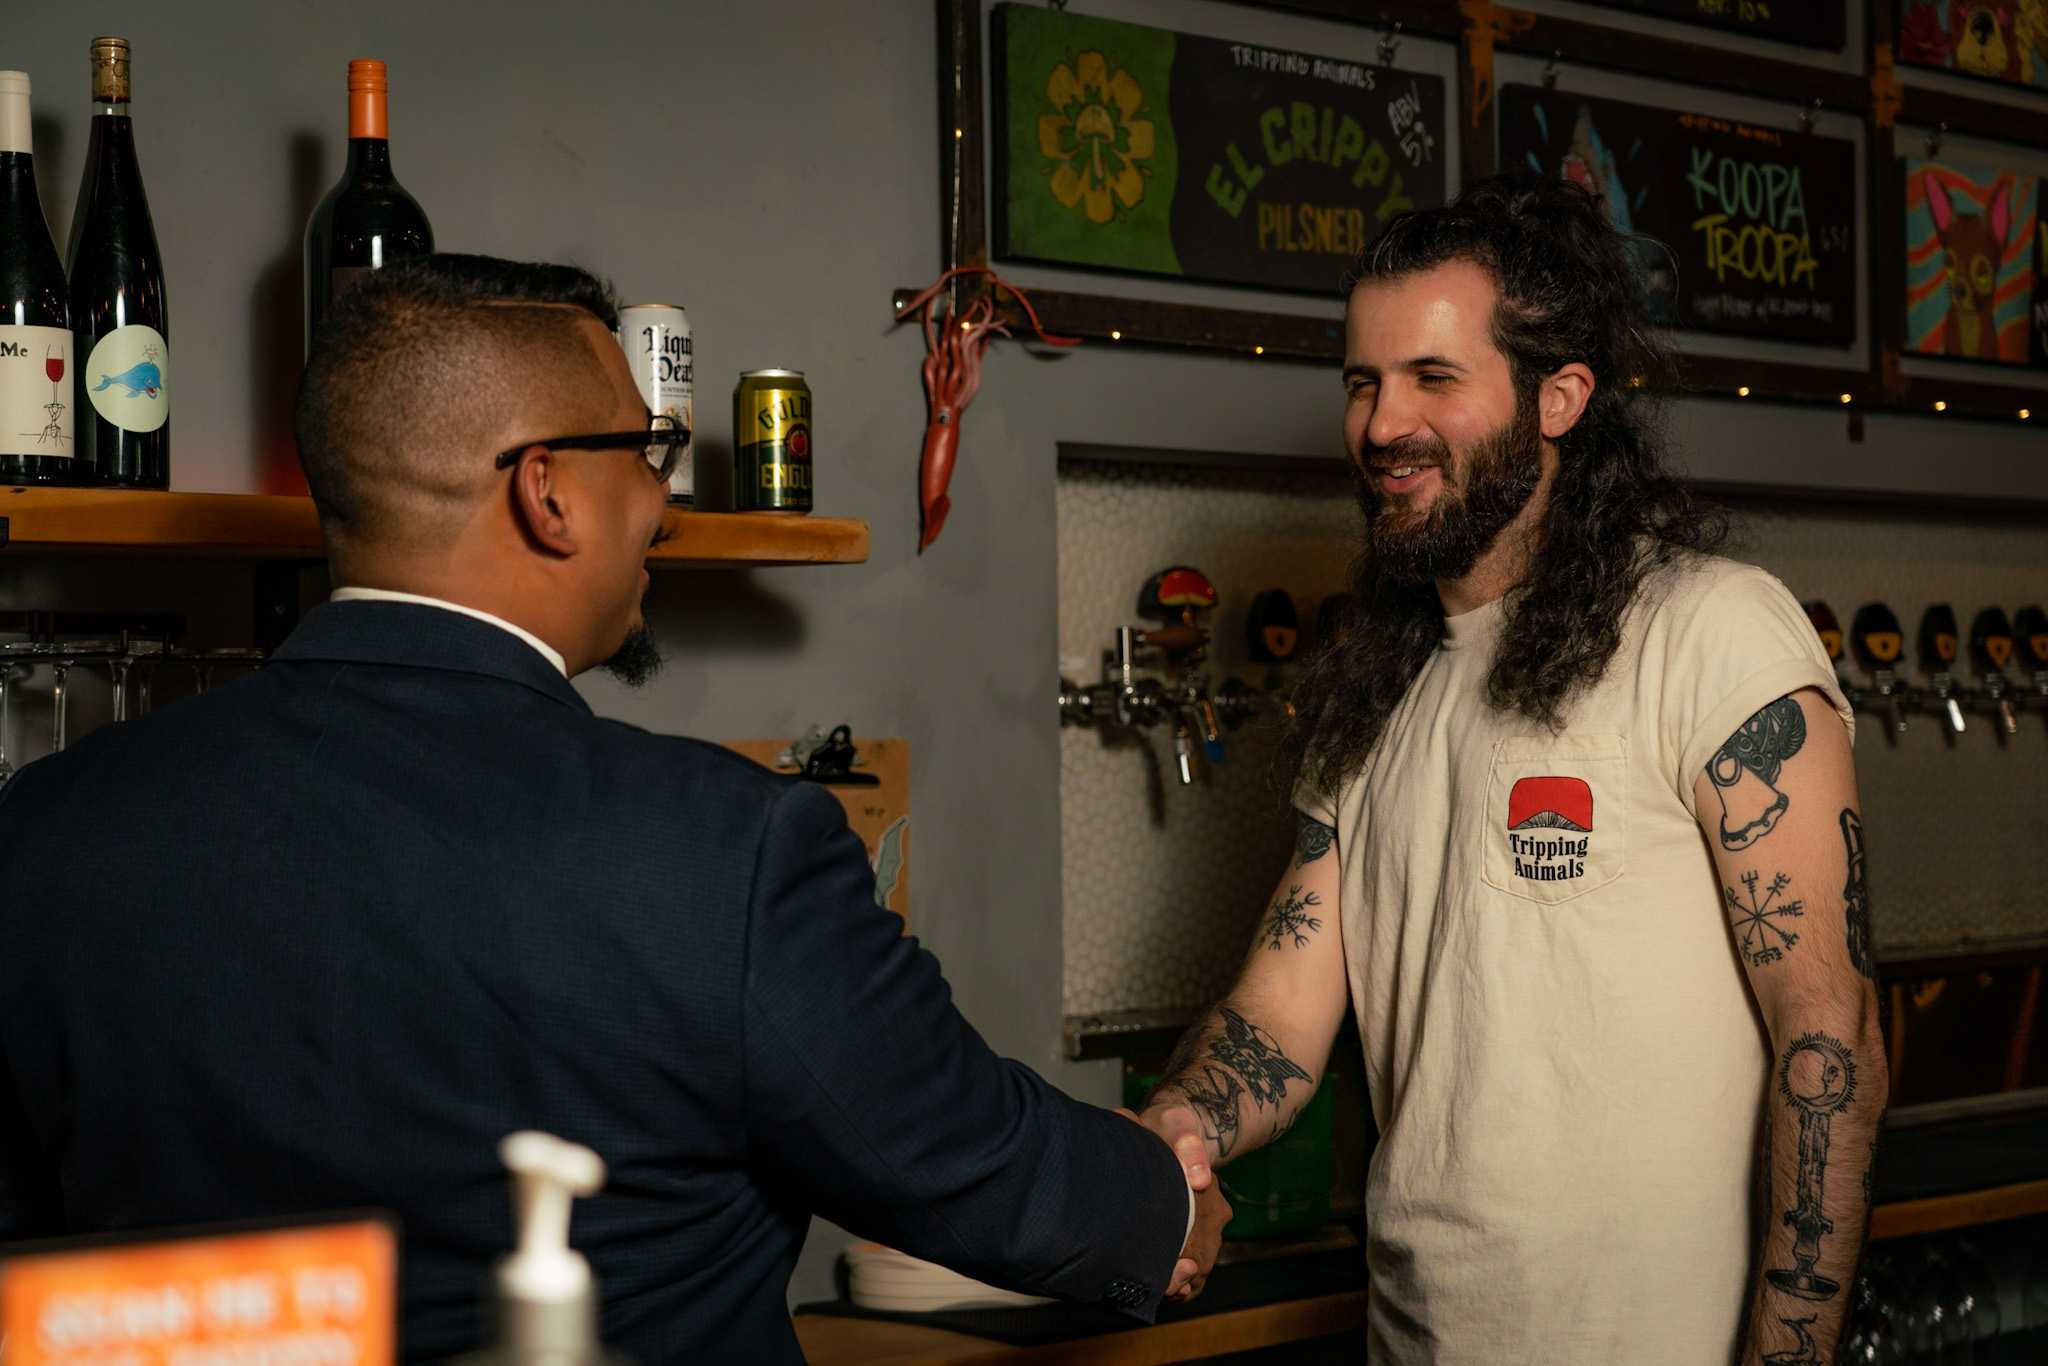 Shaking hands with brewery owner.